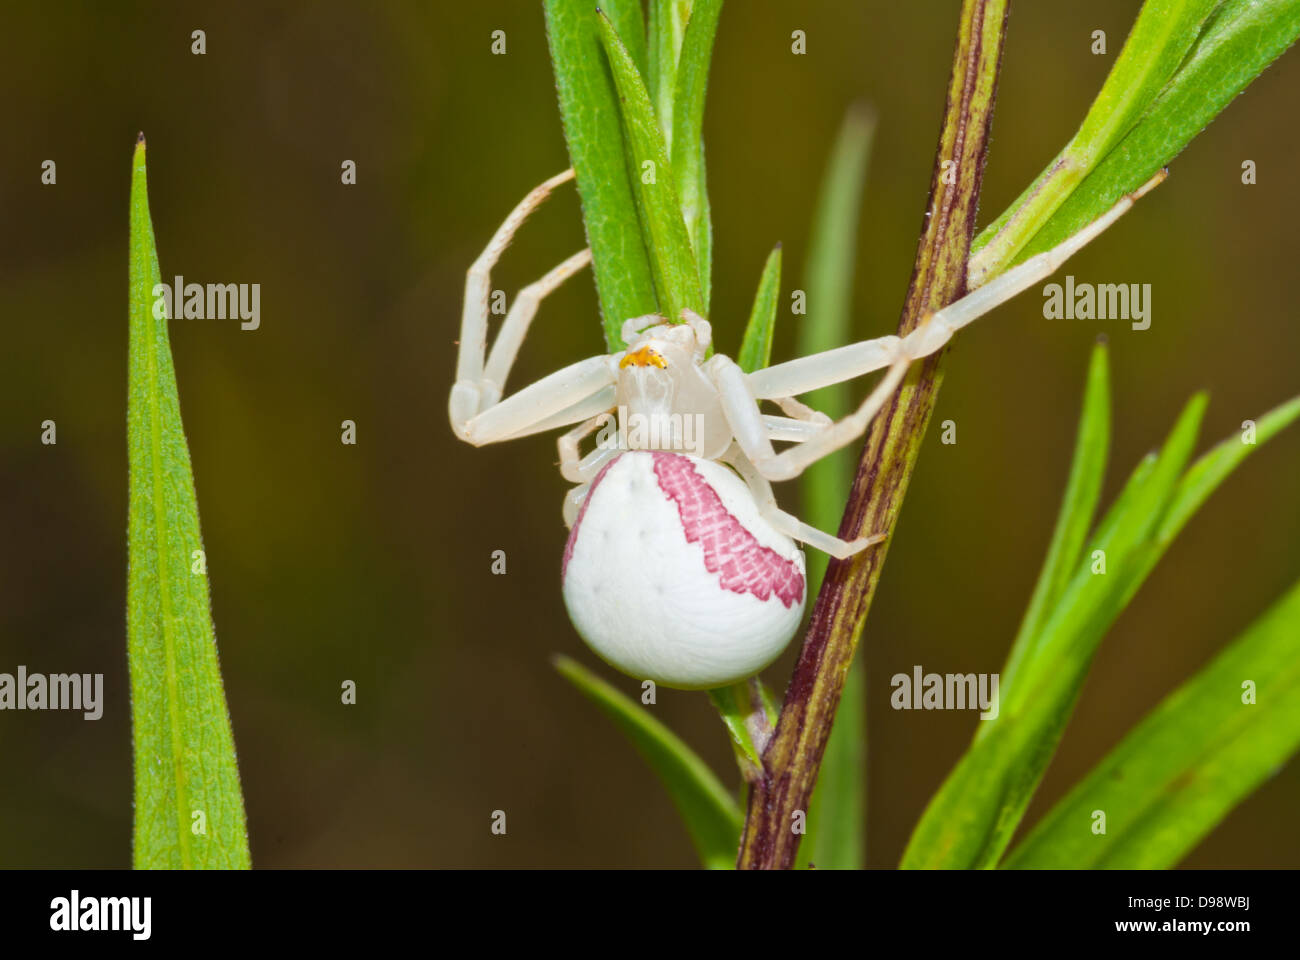 Closeup of a goldenrod crab spider (Misumena vatia) with pink body stripes in a hunting pose on vegetation Stock Photo